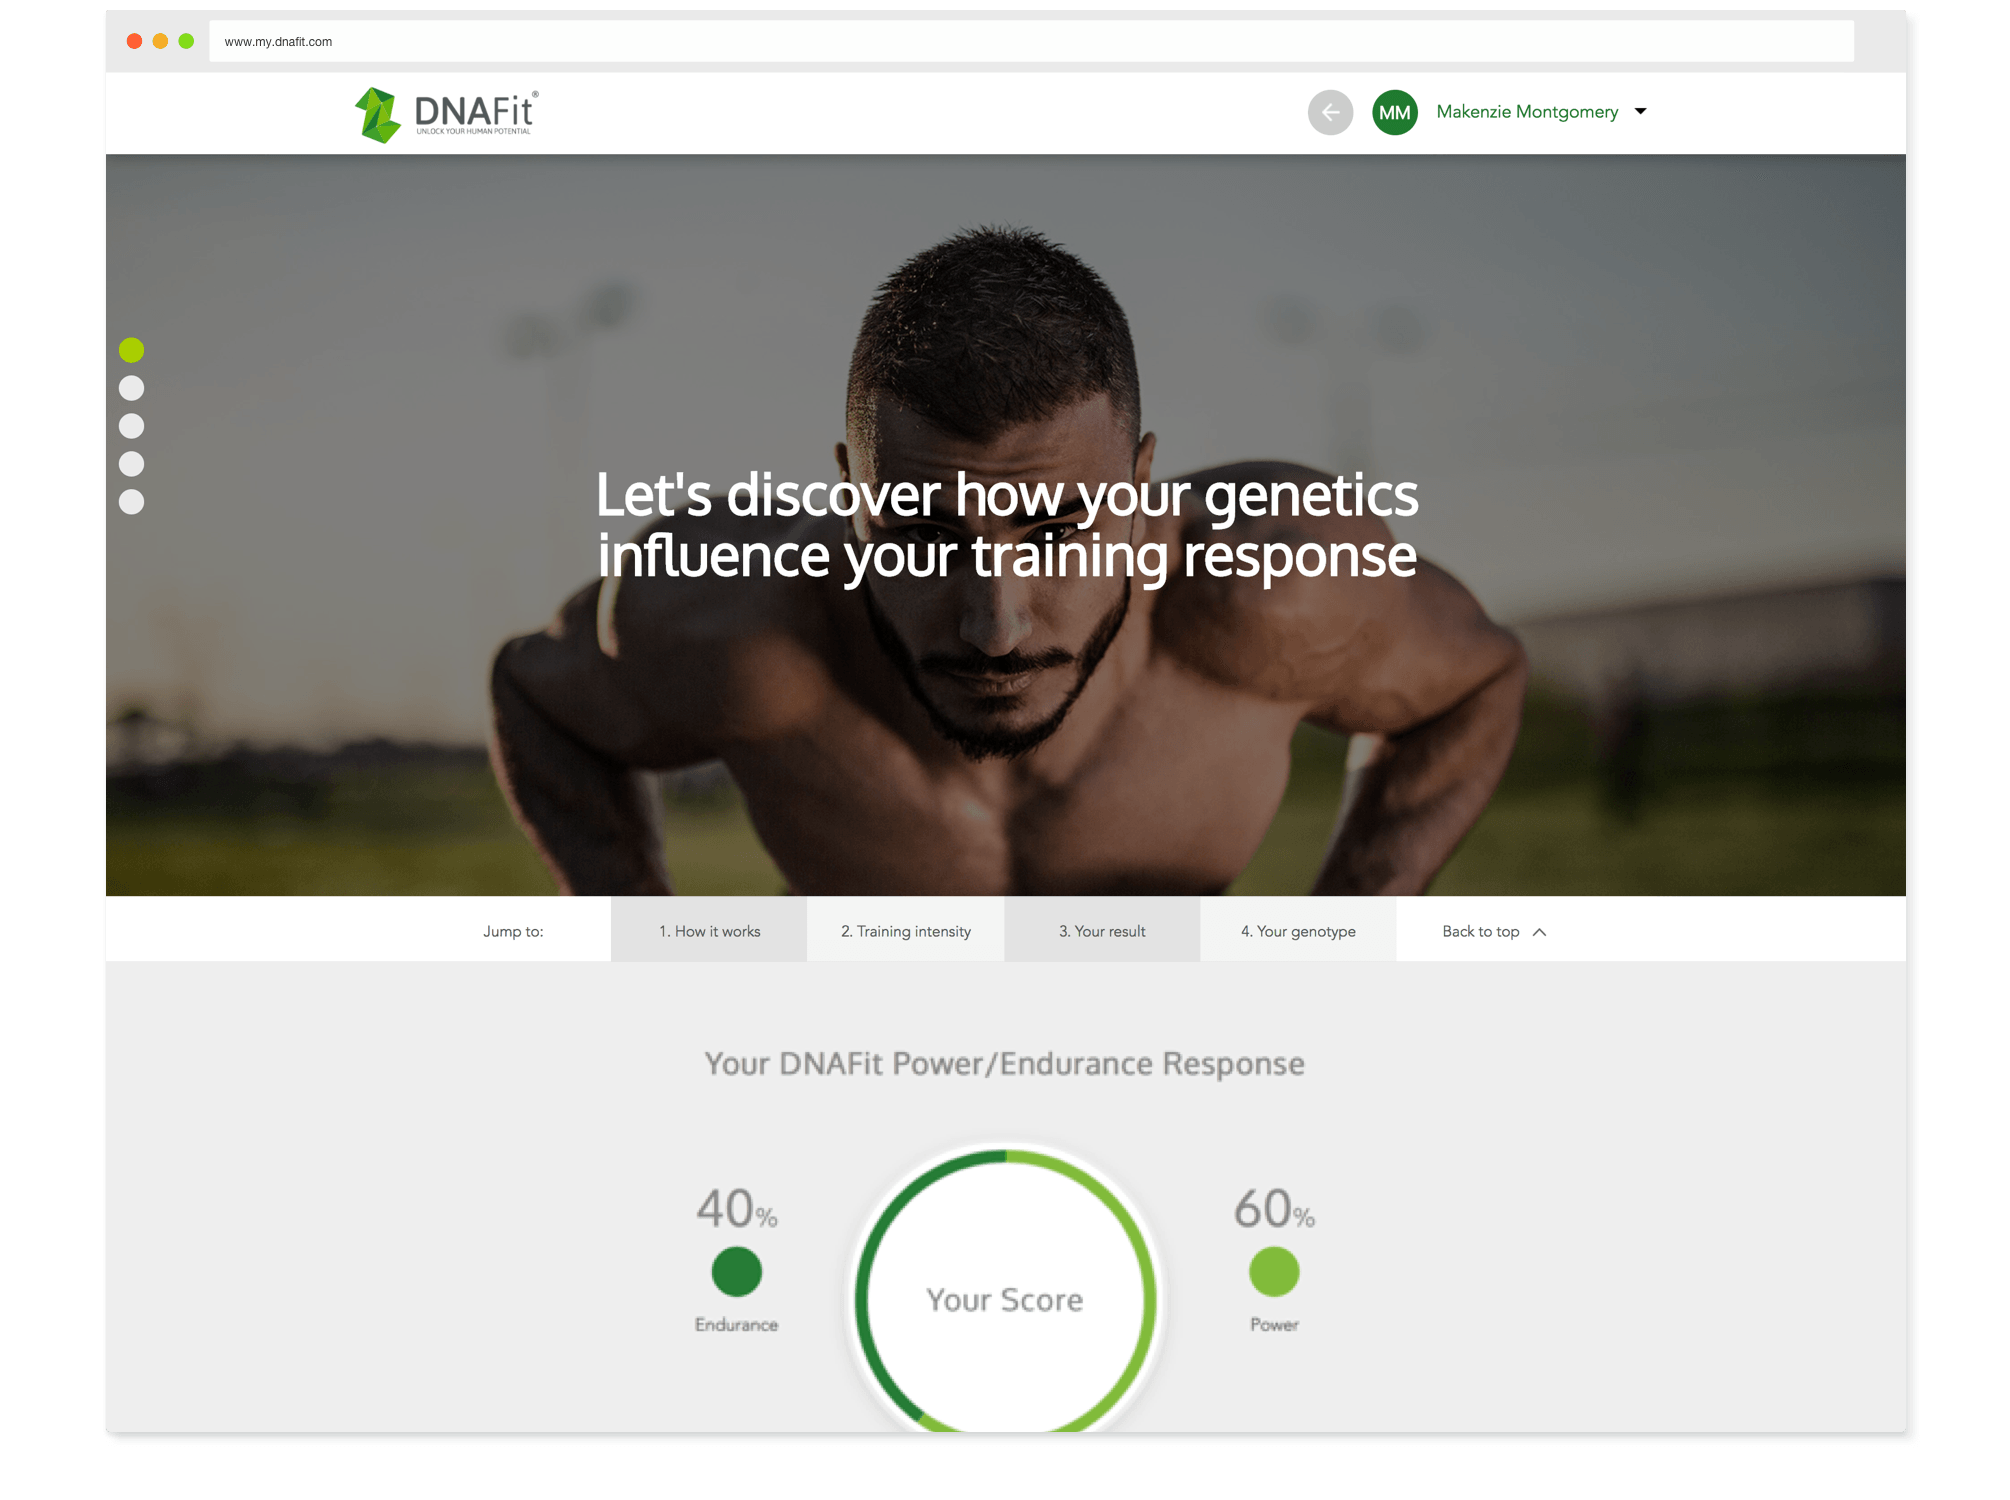 Follow a more personalized workout program based on your genetic fitness profile.